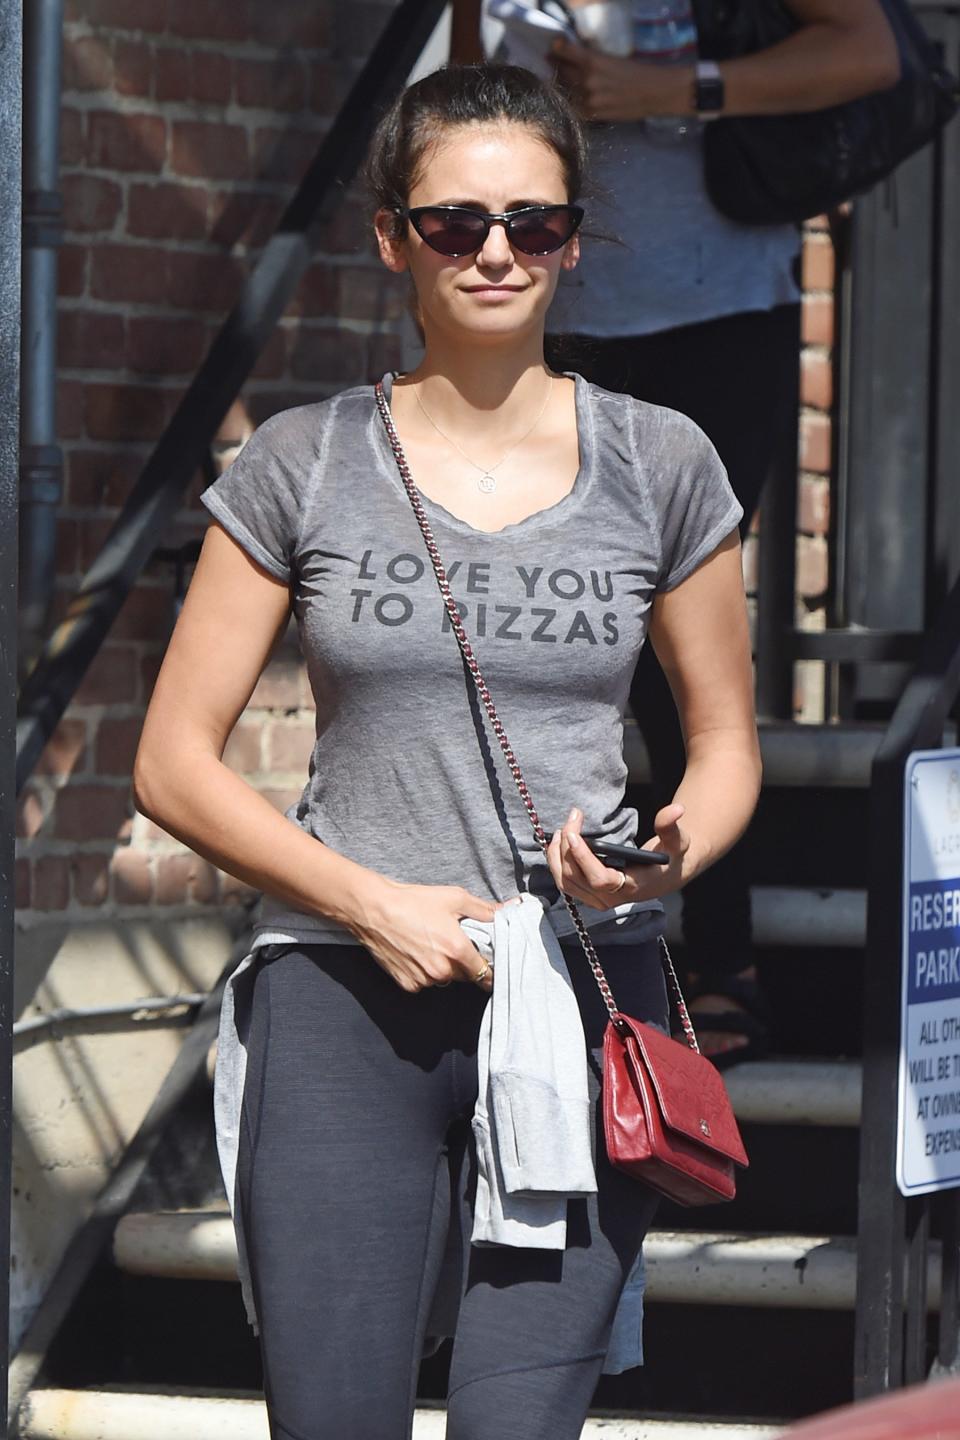 Nina Dobrev wears a hilarious shirt on Tuesday for a trip to the gym in West Hollywood.